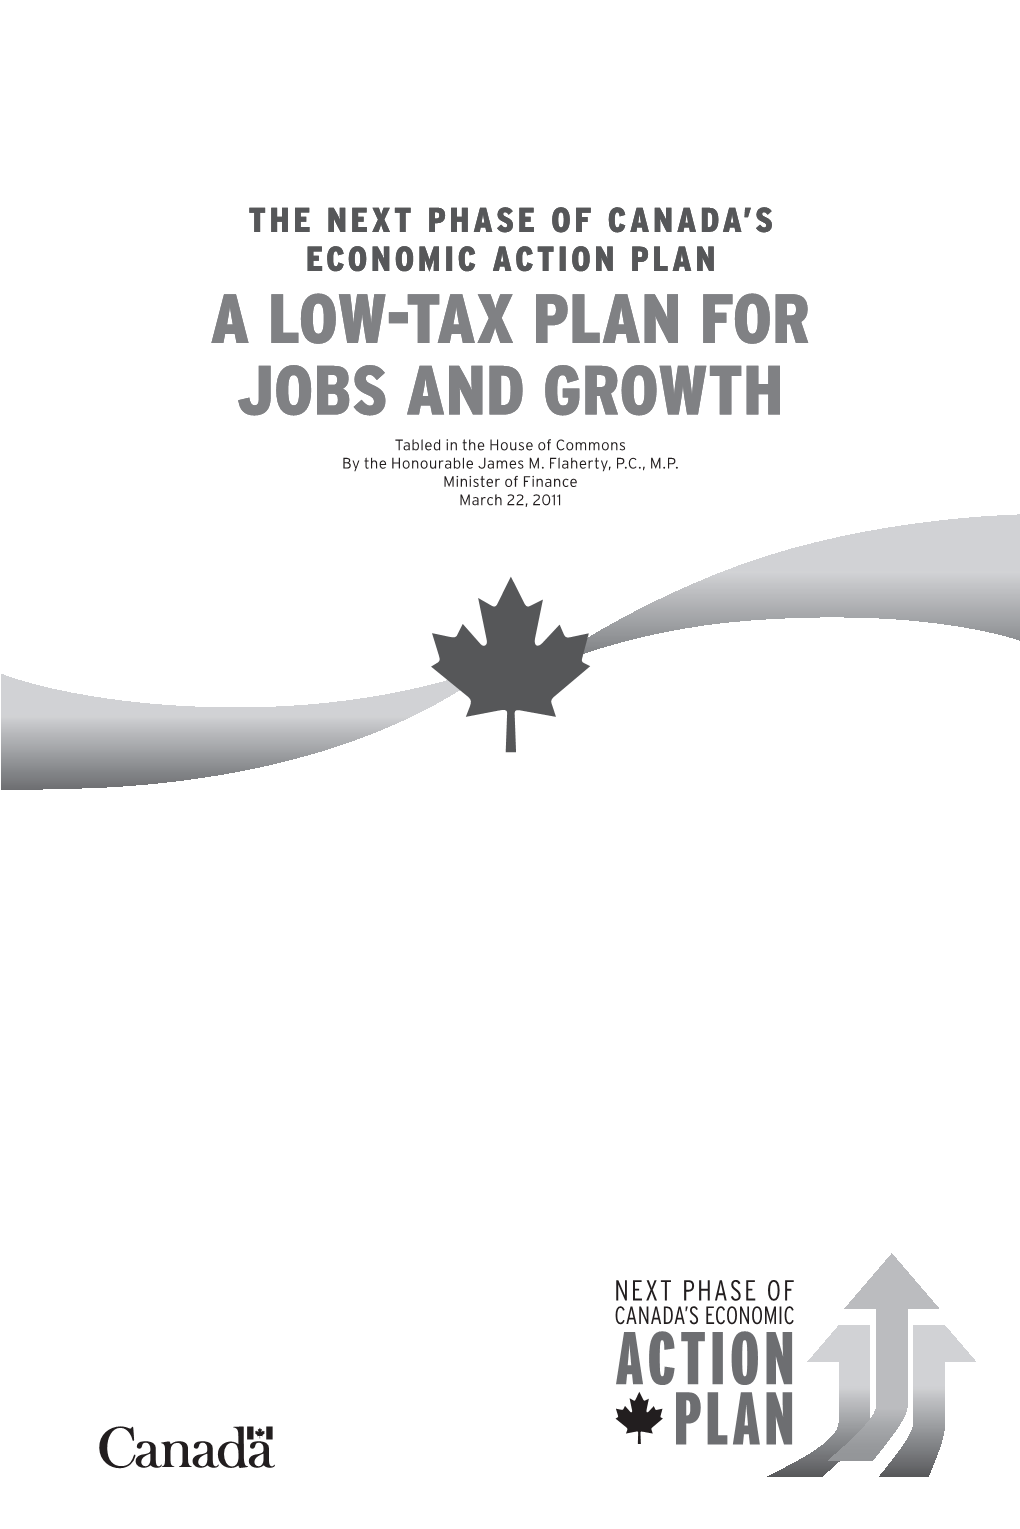 The Next Phase of Canada's Economic Action Plan